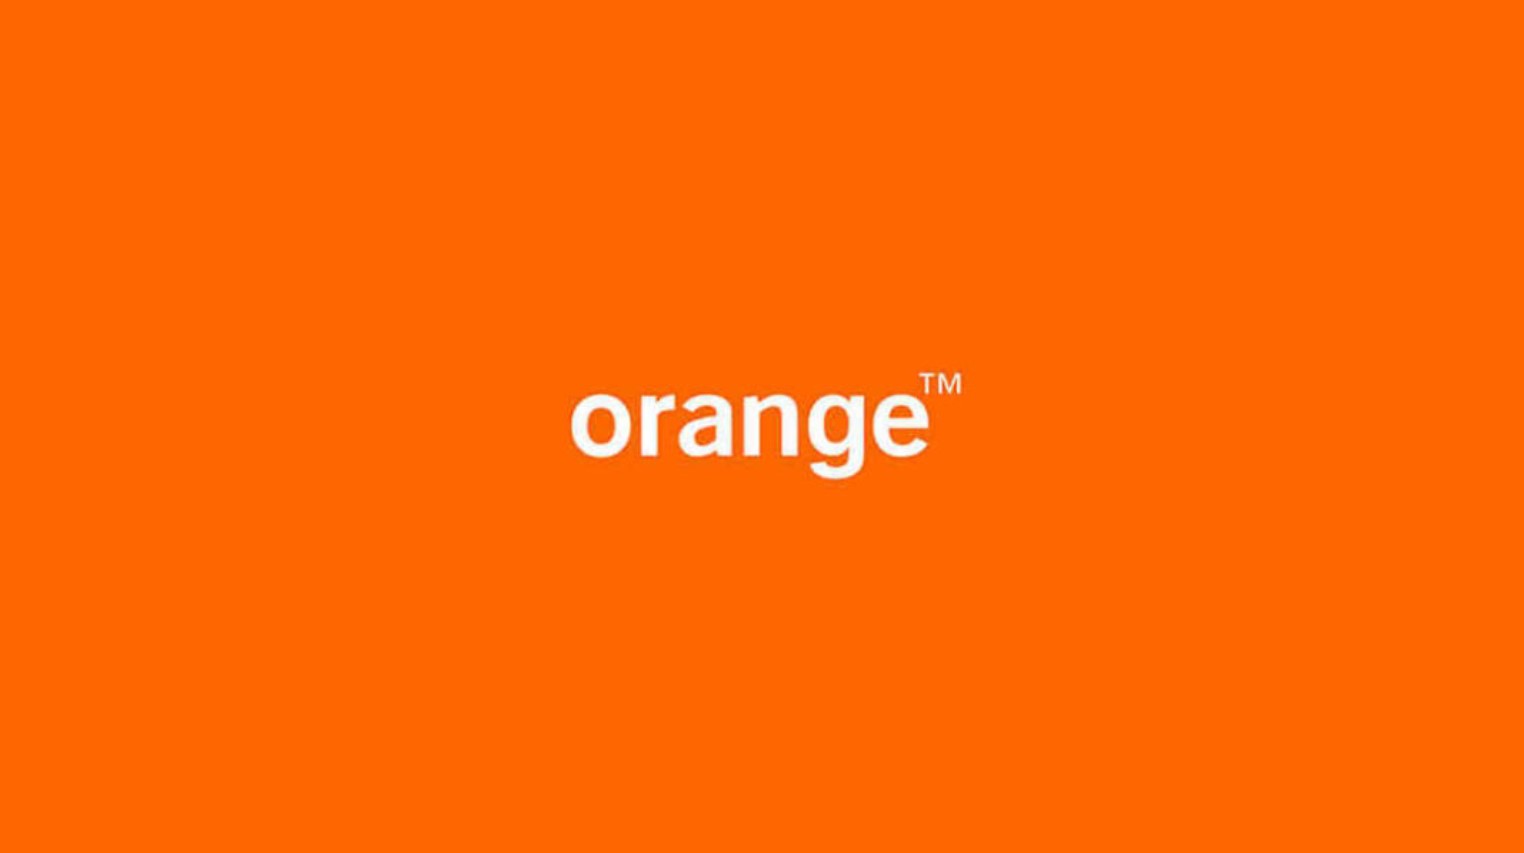 Orange Empresas Customer Service: Telephone, Contact And Support Email